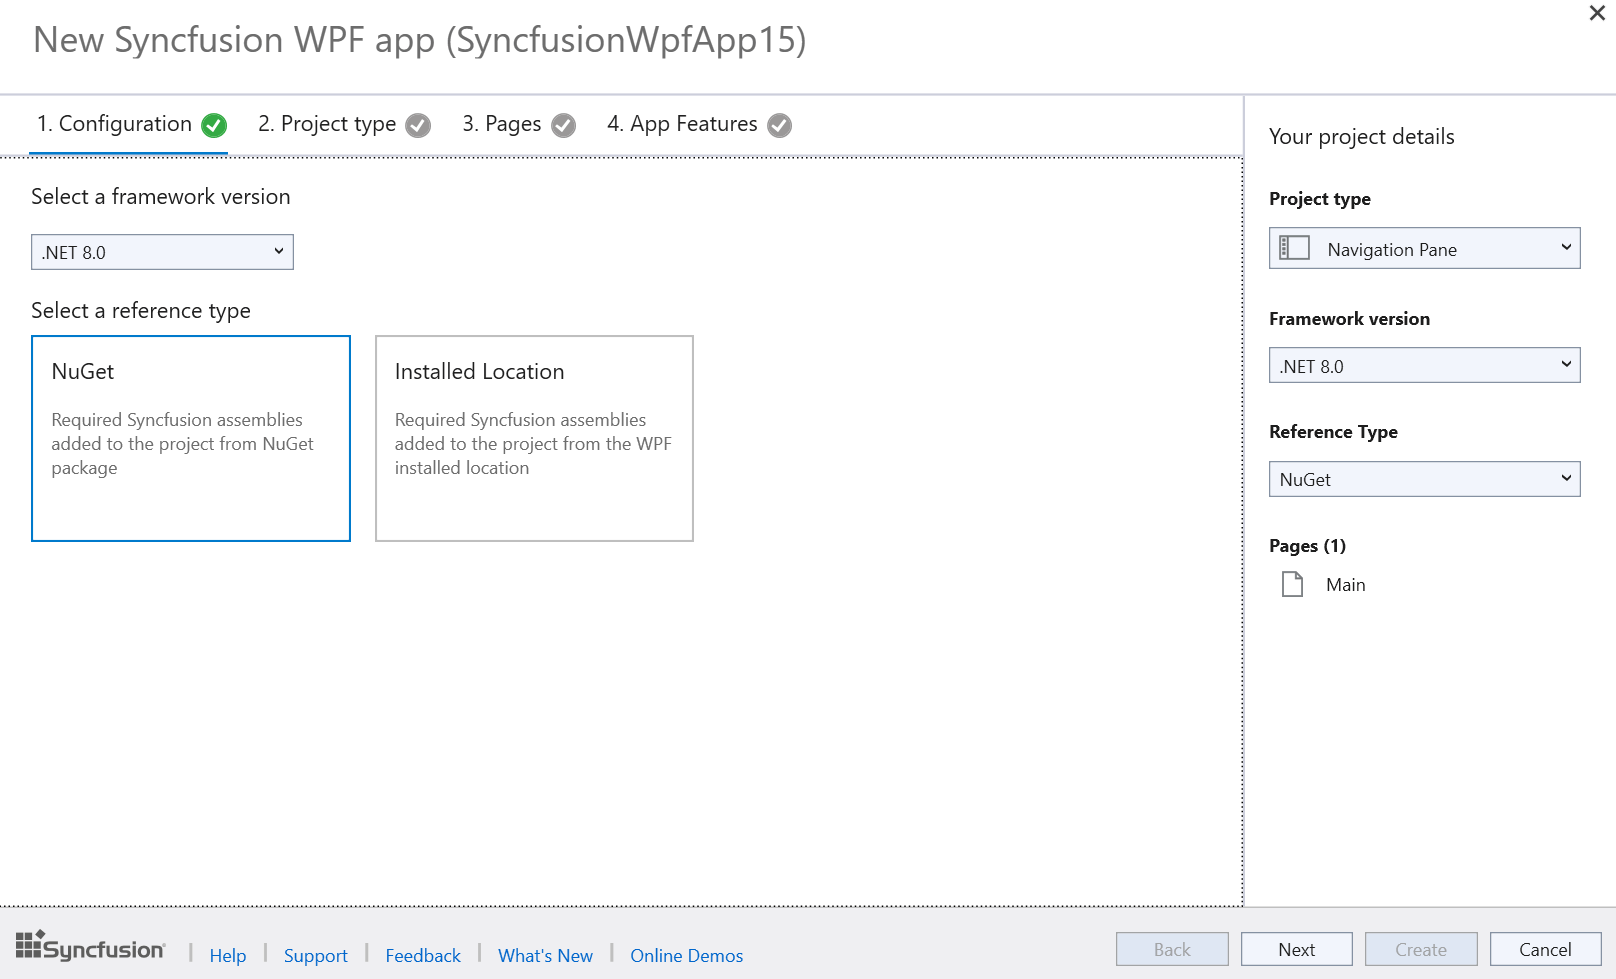 Choose .NET 8 version on the New Syncfusion WPF app wizard